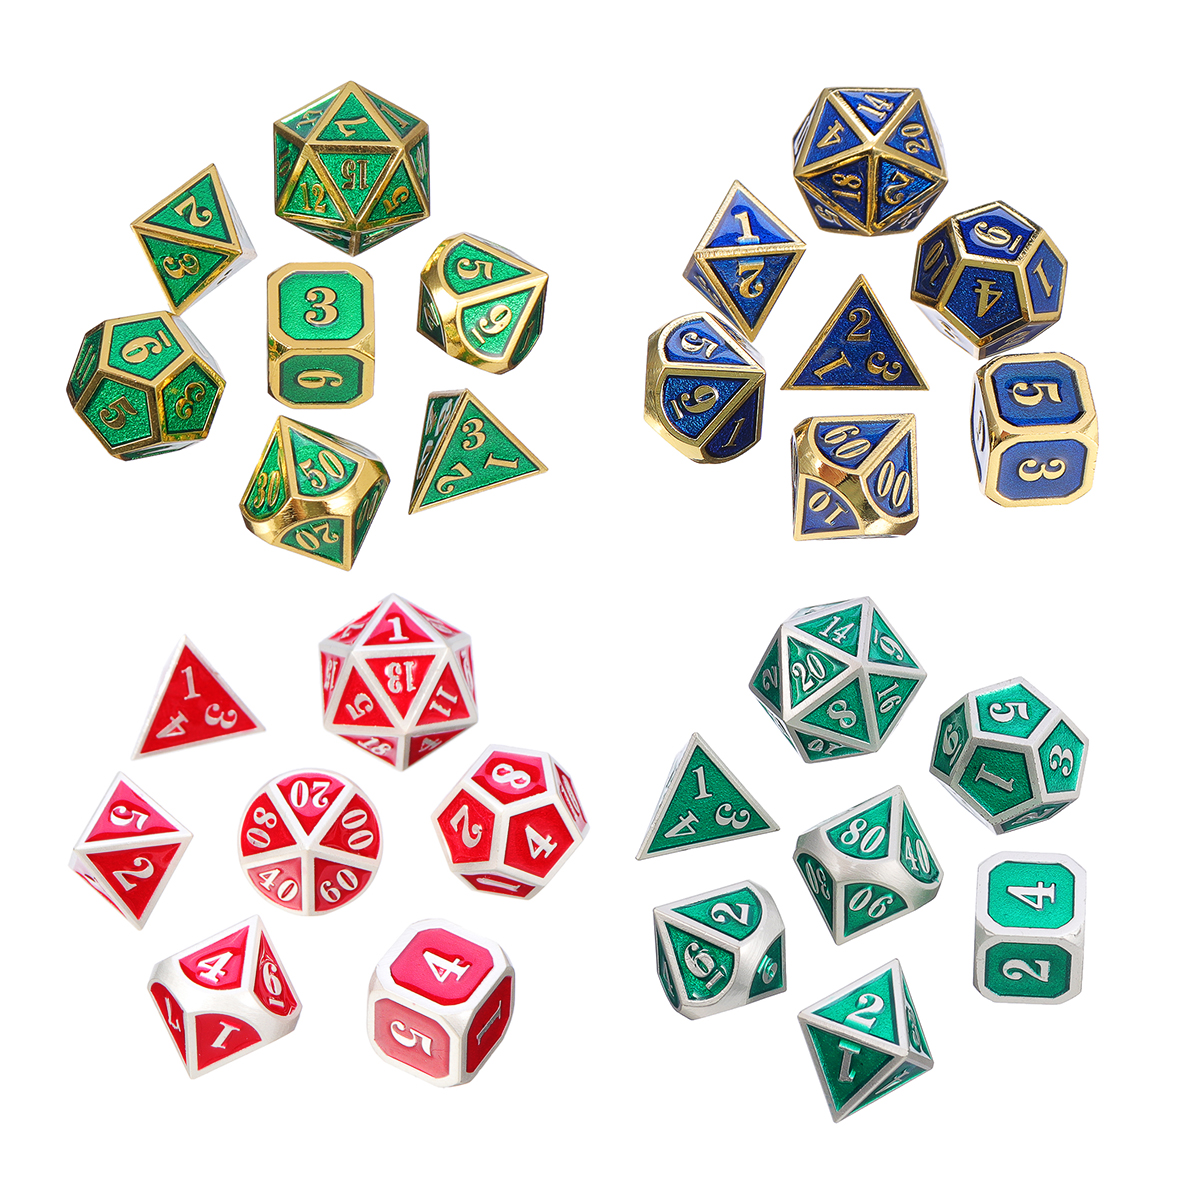 7Pcs-Heavy-Duty-Metal-Polyhedral-Dices-Set-Multisided-Dice-Antique-RPG-Role-Playing-Game-Dices-1371263-3